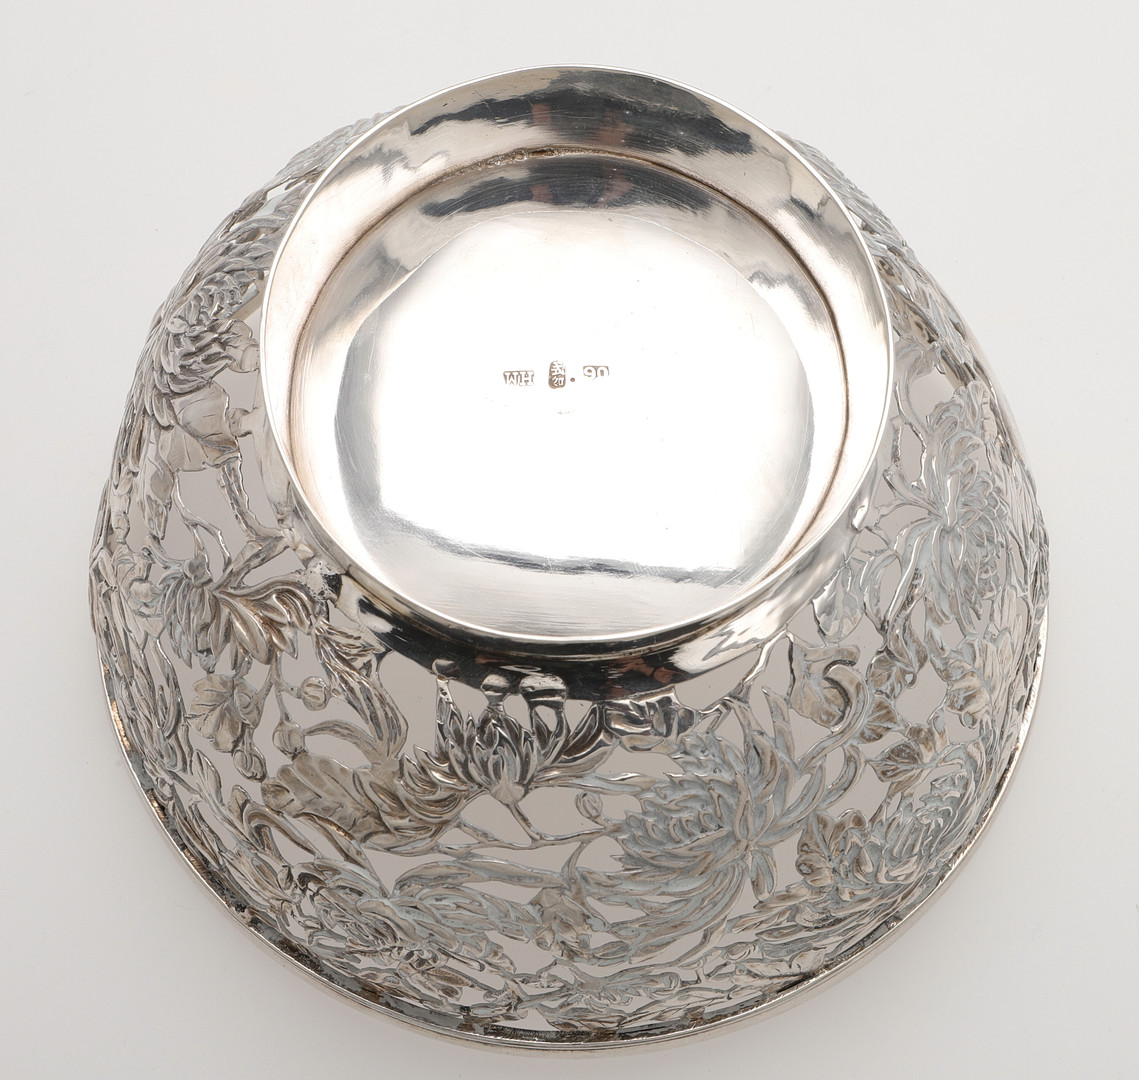 A LATE 19TH/ EARLY 20TH CENTURY CHINESE SILVER ROSE BOWL. - Image 5 of 6